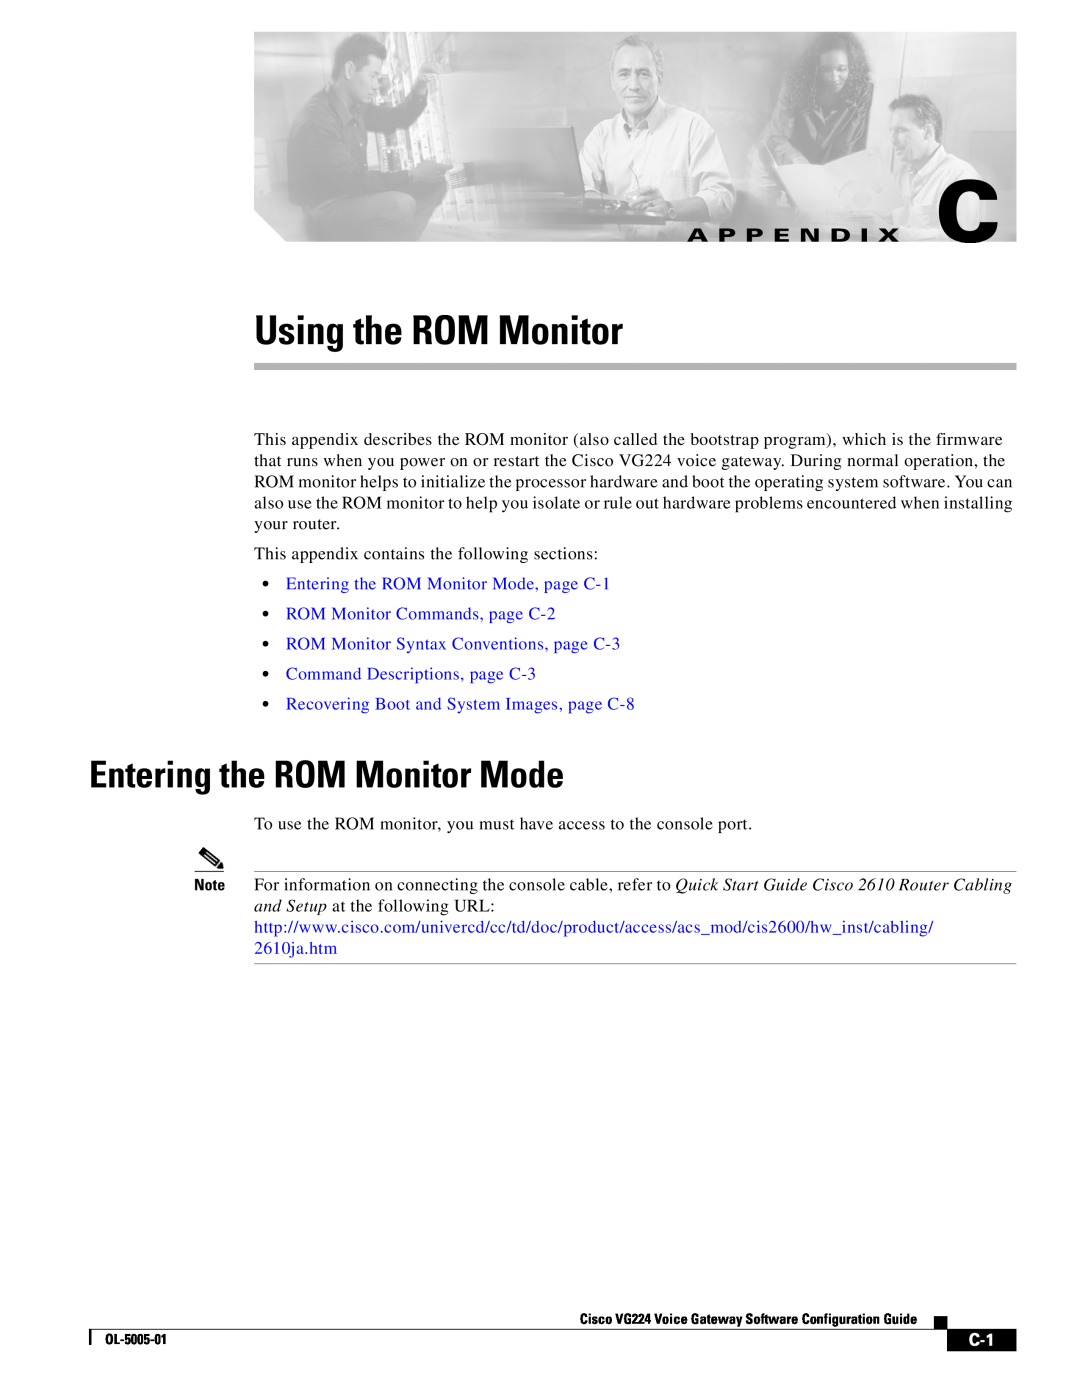 Cisco Systems VG224 manual Using the ROM Monitor, Entering the ROM Monitor Mode, A P P E N D I X C 